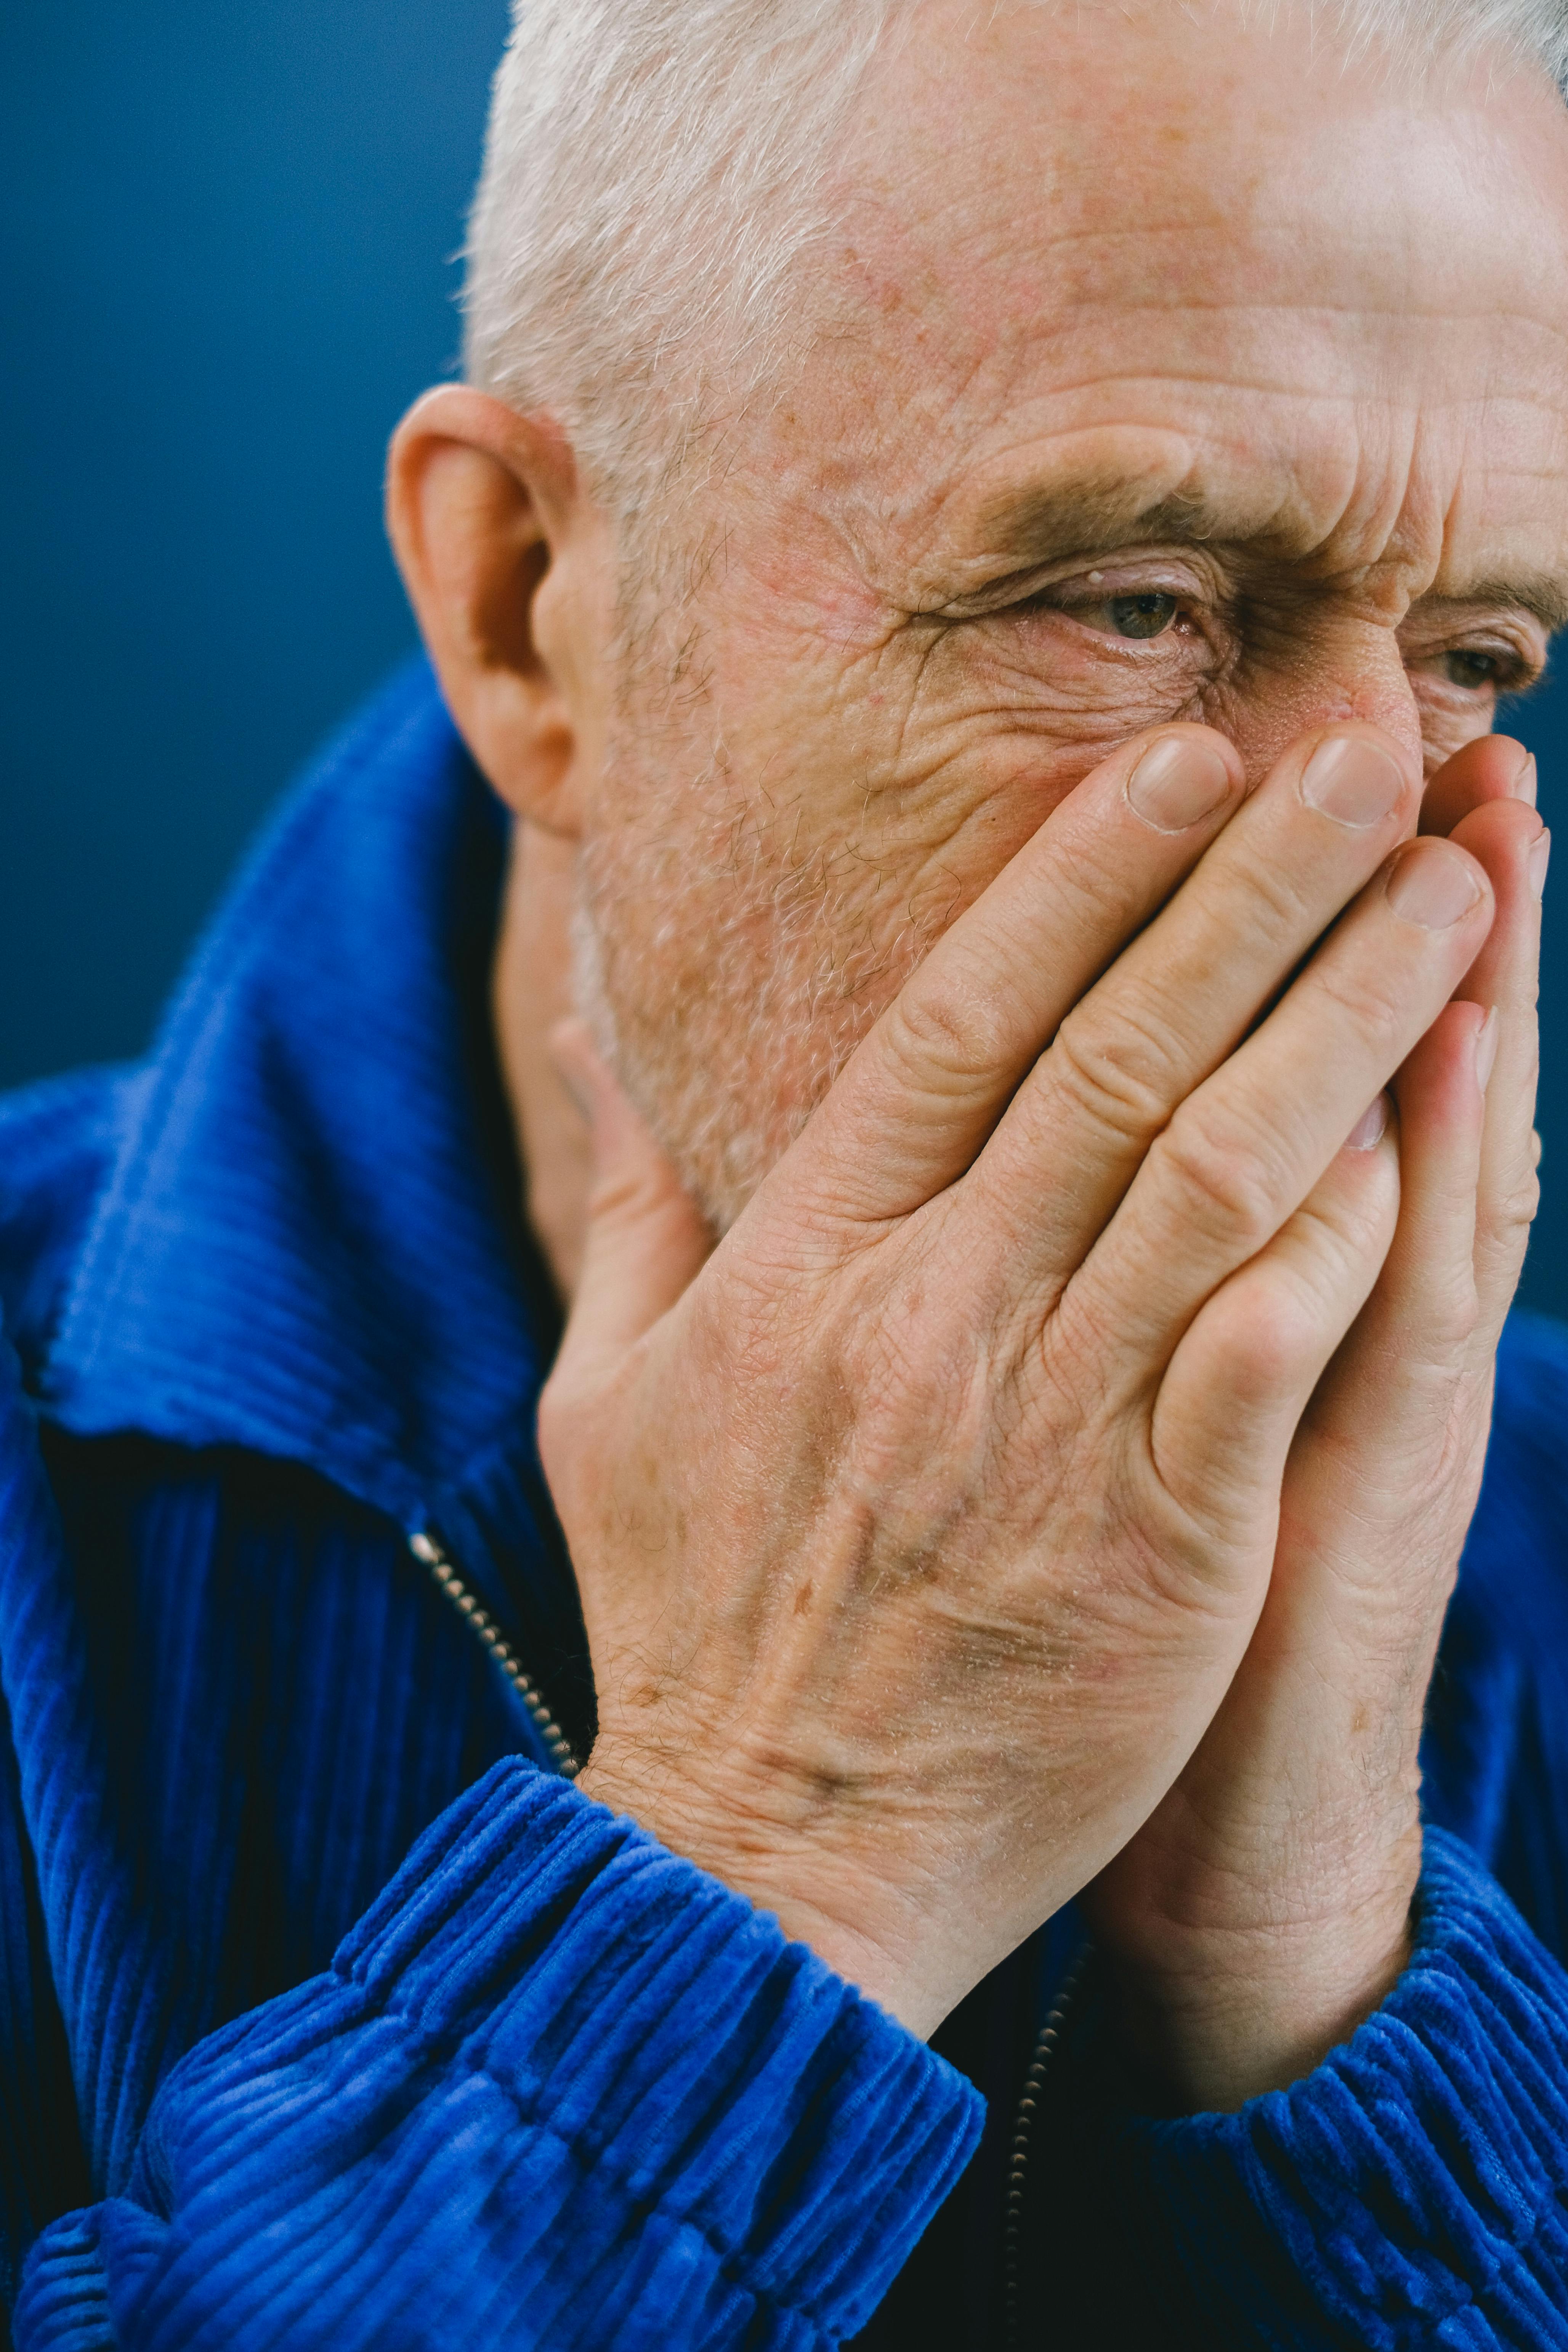 An upset middle-aged man covering his face with his hands | Source: Pexels